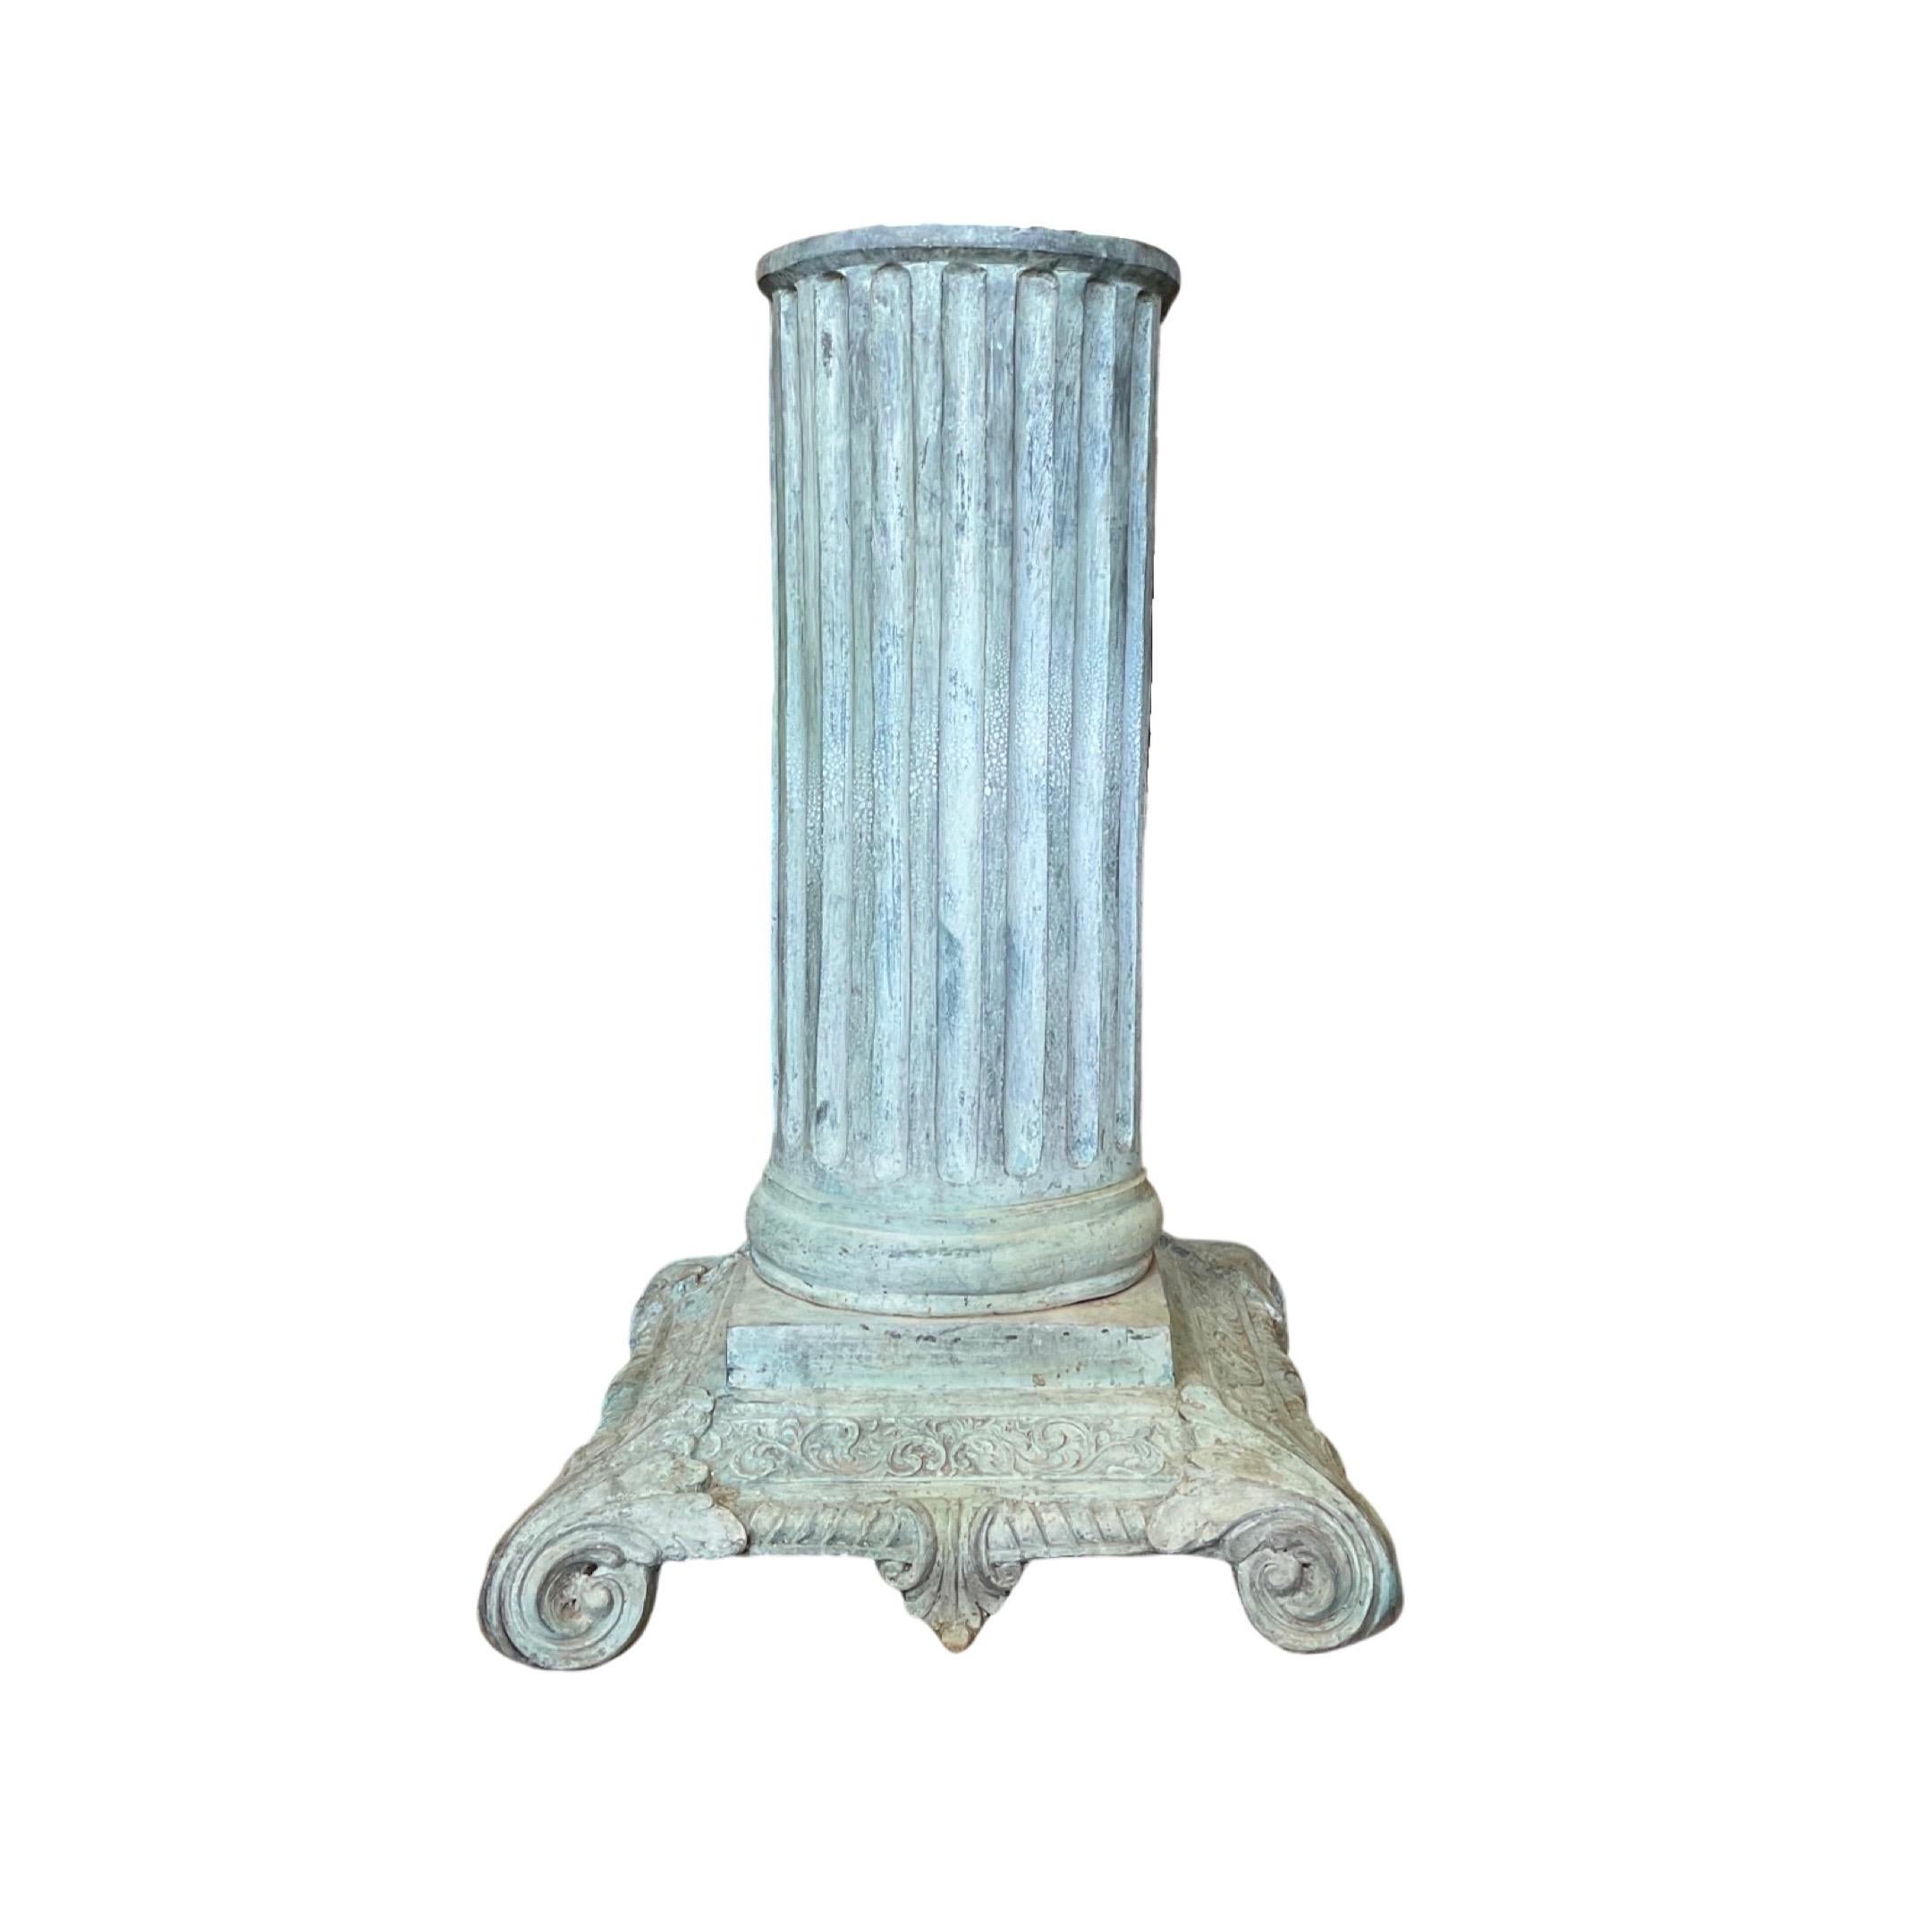 This pair of antique pedestals is a beautiful way to display art or a flower arrangement. Crafted from bronze in France during the 19th century, these sturdy pedestals will enhance any room's décor. Buy a pair today to show off your unique